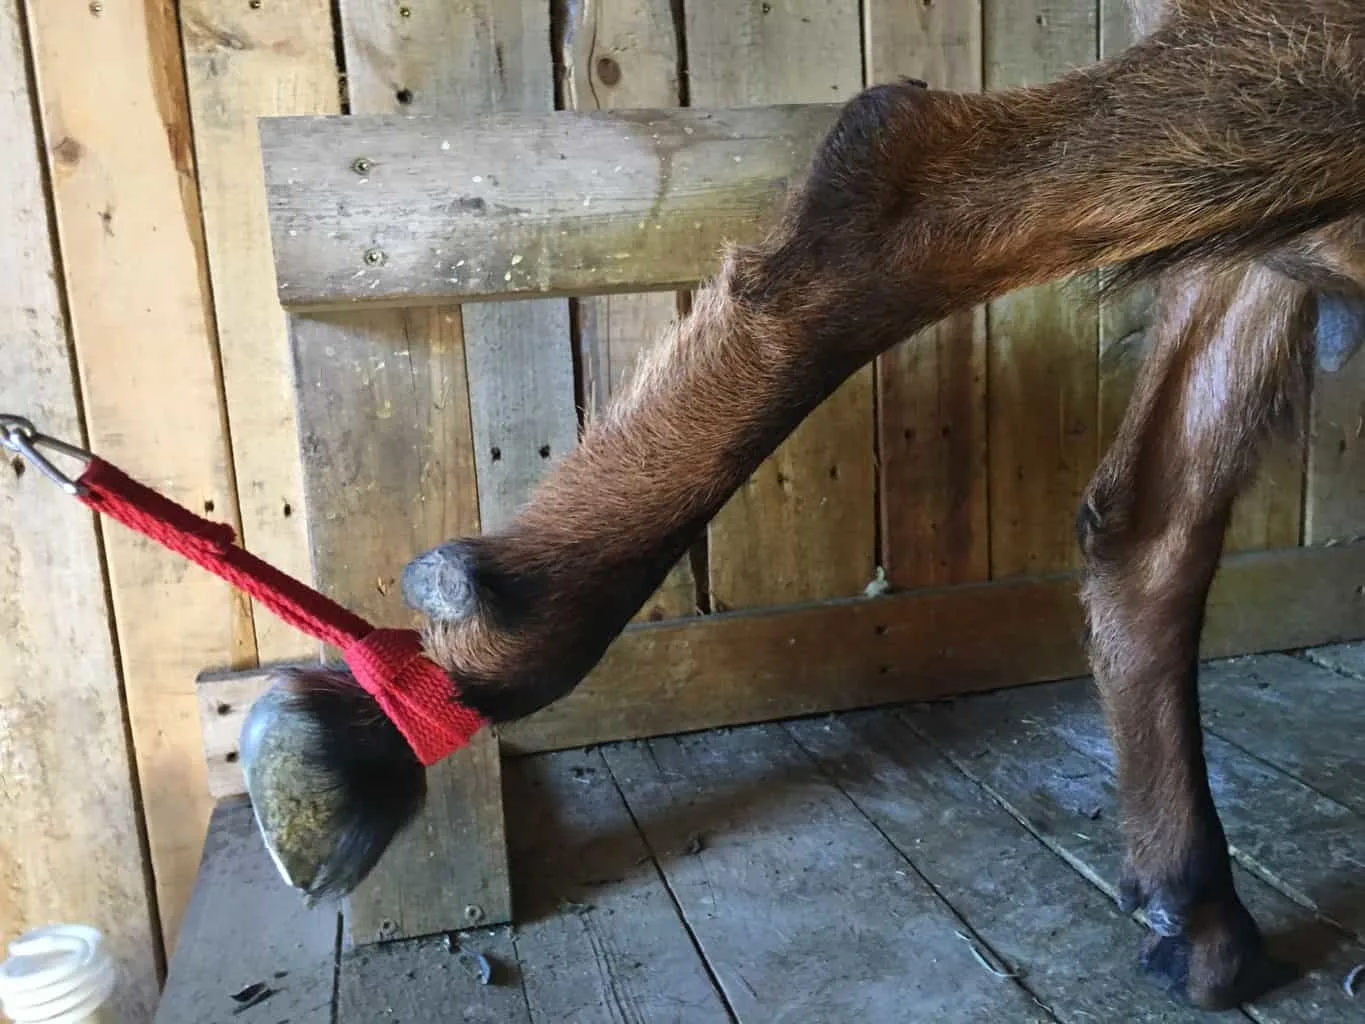 When a back leg of a goat is raised off the milking stand, it takes away their power and ability to be able to kick and knock over a milking pail. An effective tool in training new goats to milk